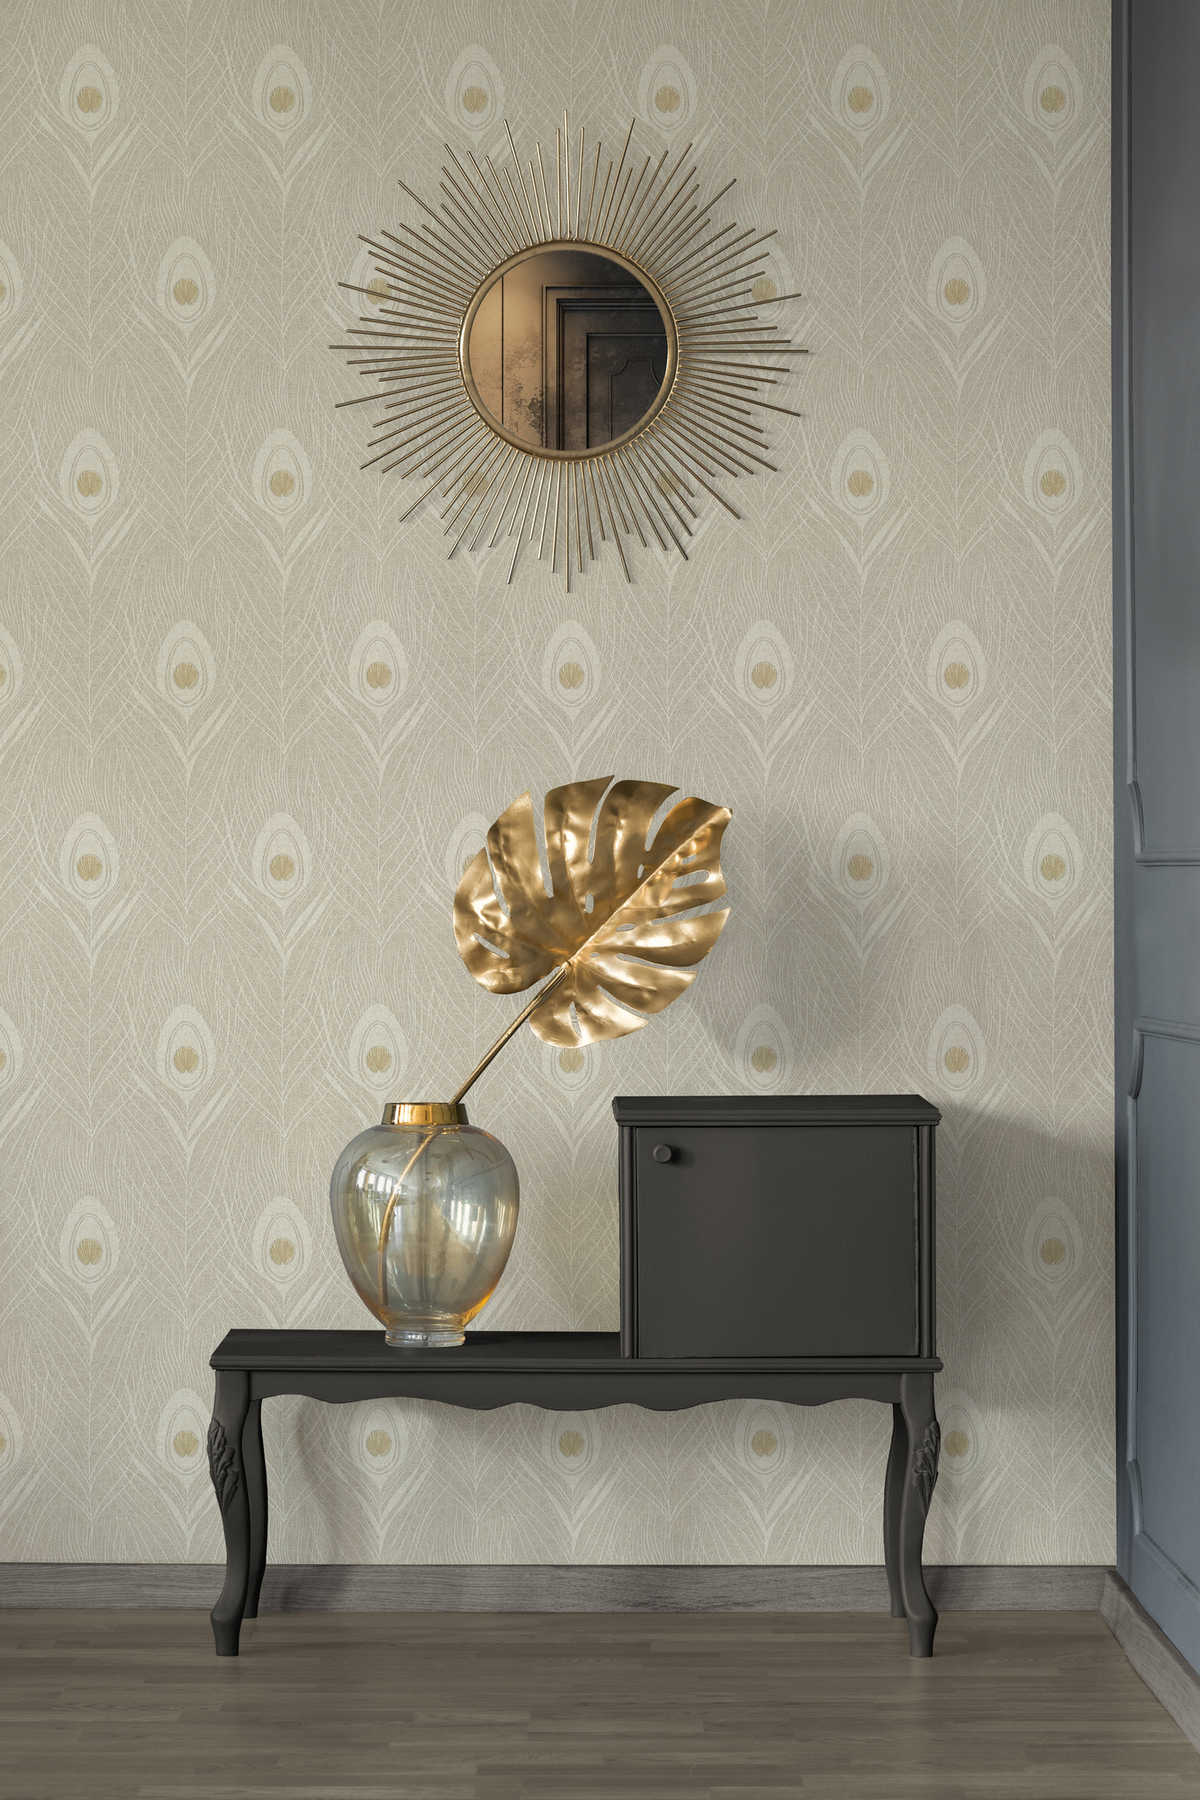             Sand coloured non-woven wallpaper with peacock feathers - beige, gold, grey
        